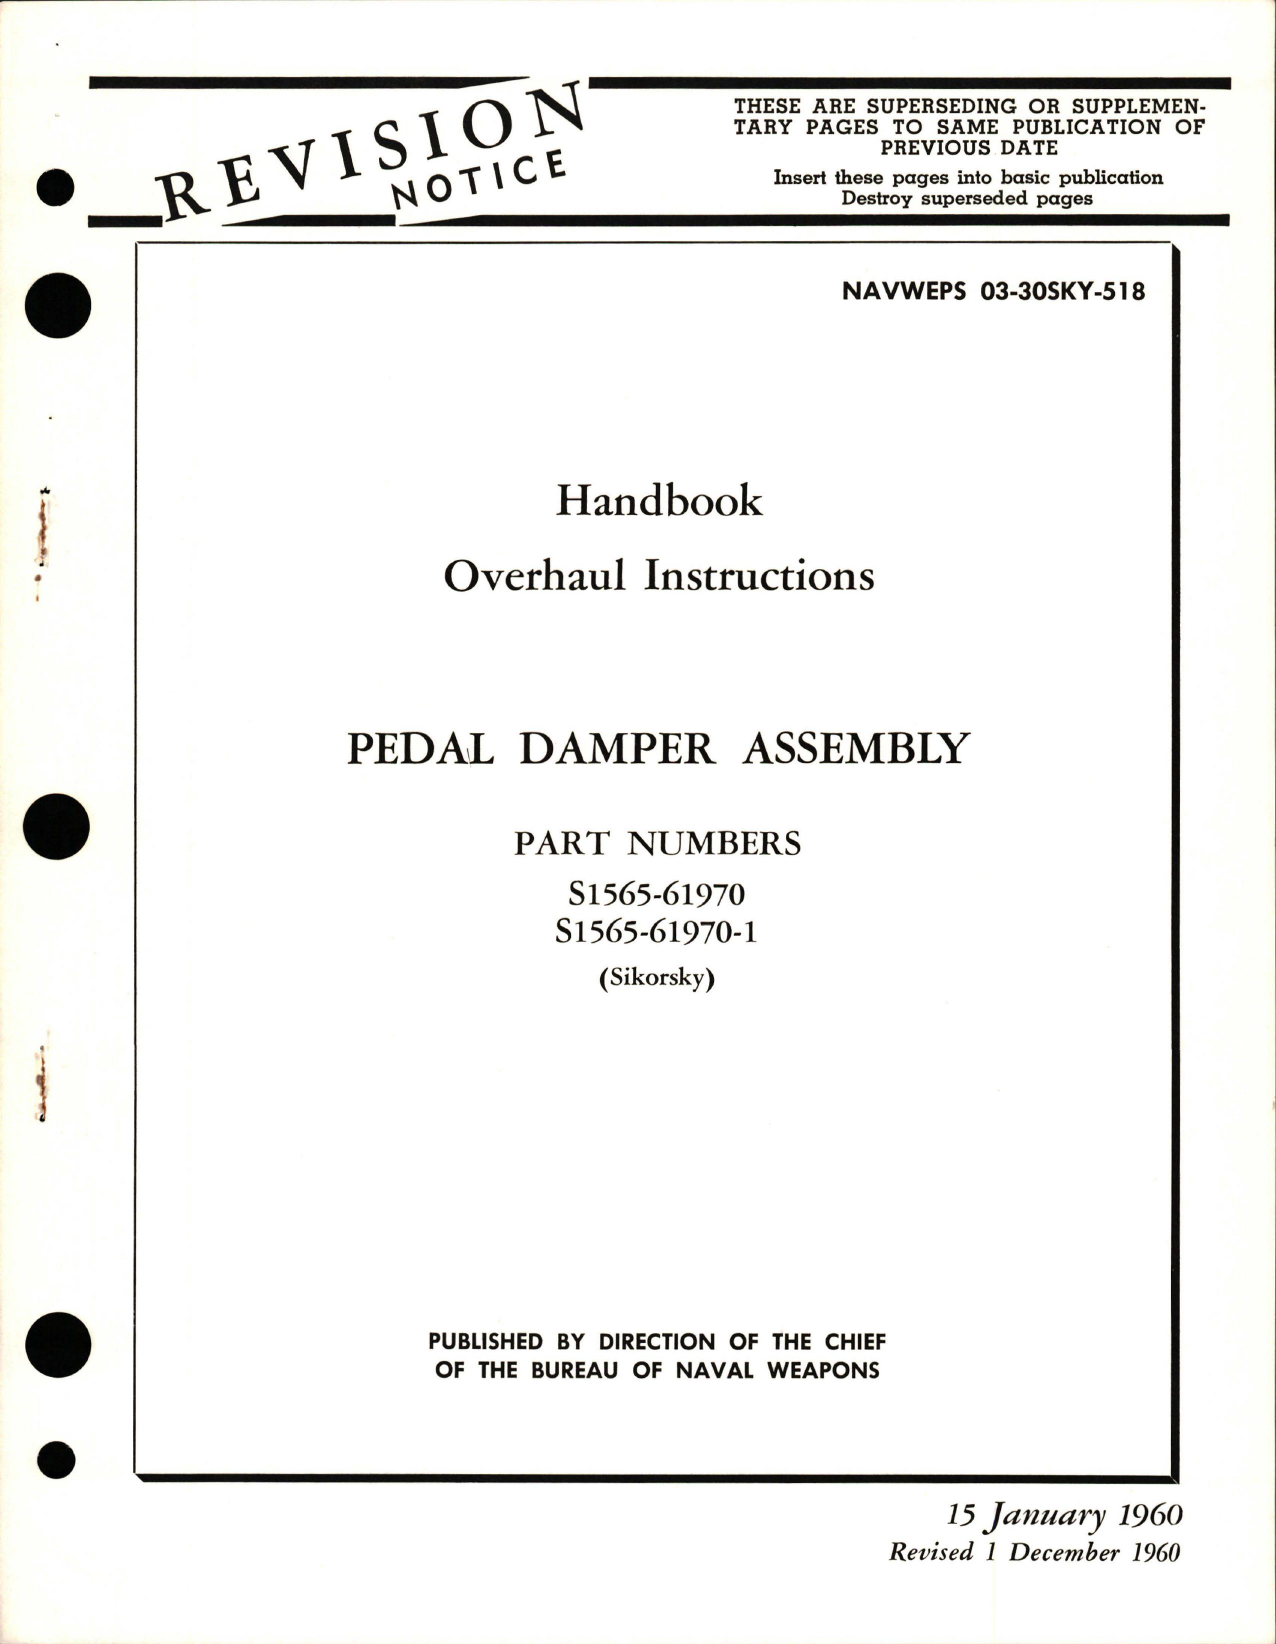 Sample page 1 from AirCorps Library document: Overhaul Instructions for Pedal Damper Assembly - Part S1565-61970 and S1565-61970-1